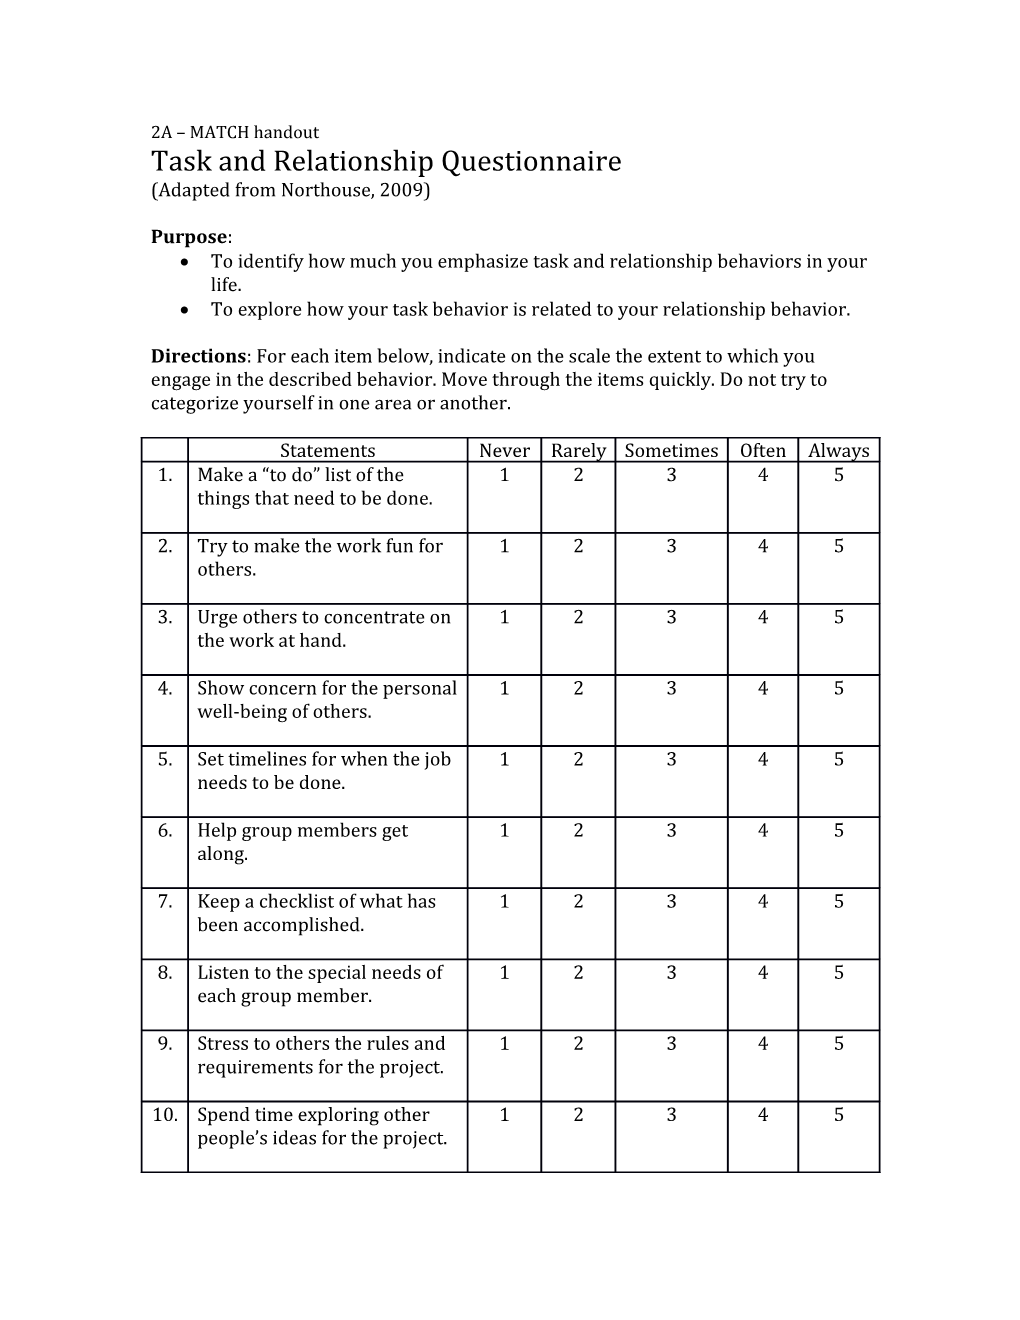 Task and Relationship Questionnaire